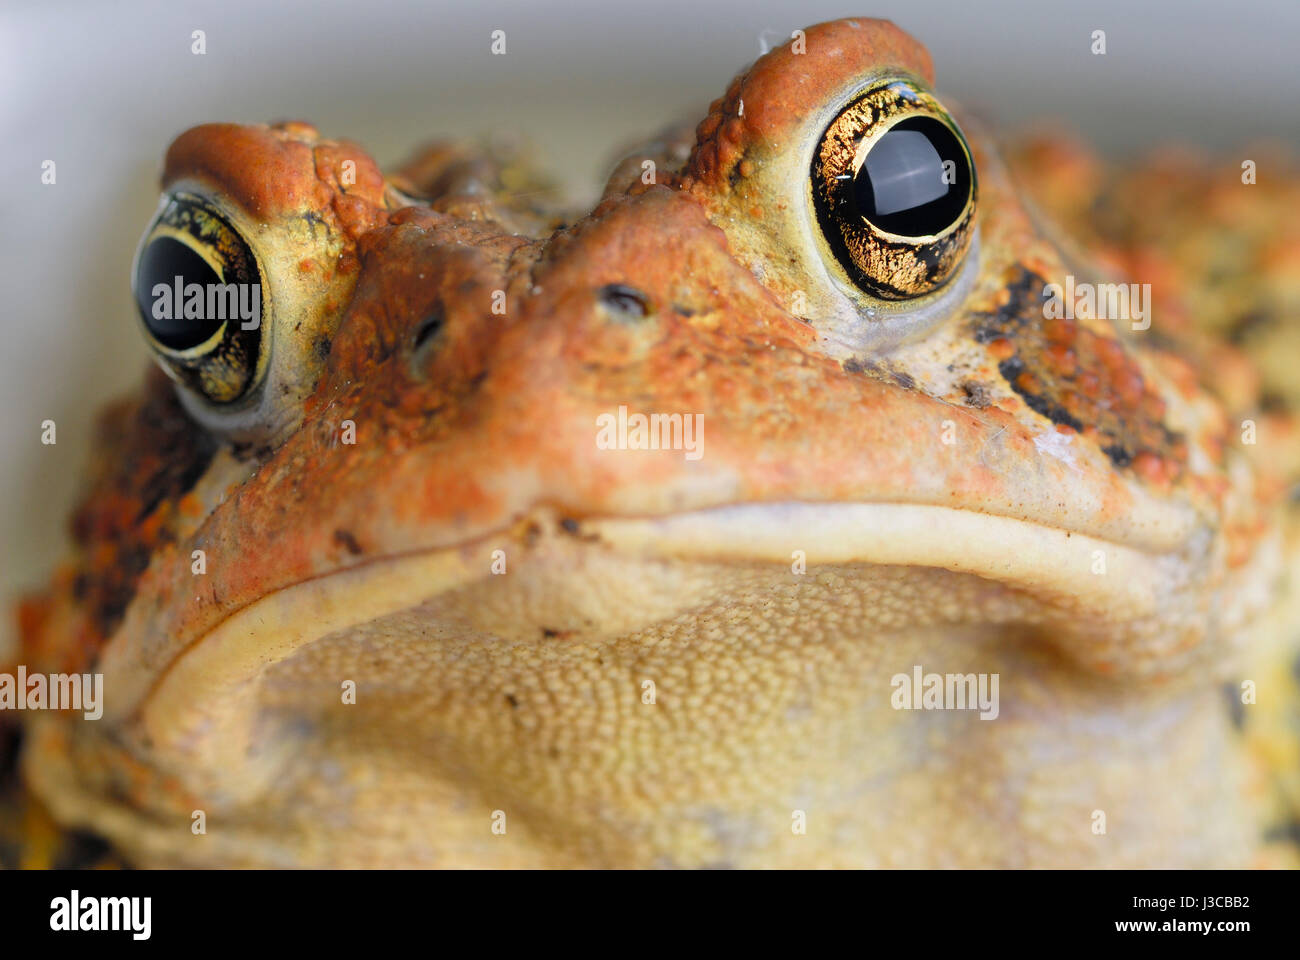 Close up of American toad Bufo Americanus face with post orbital crests and poisonous warts on wrinkled skin Stock Photo